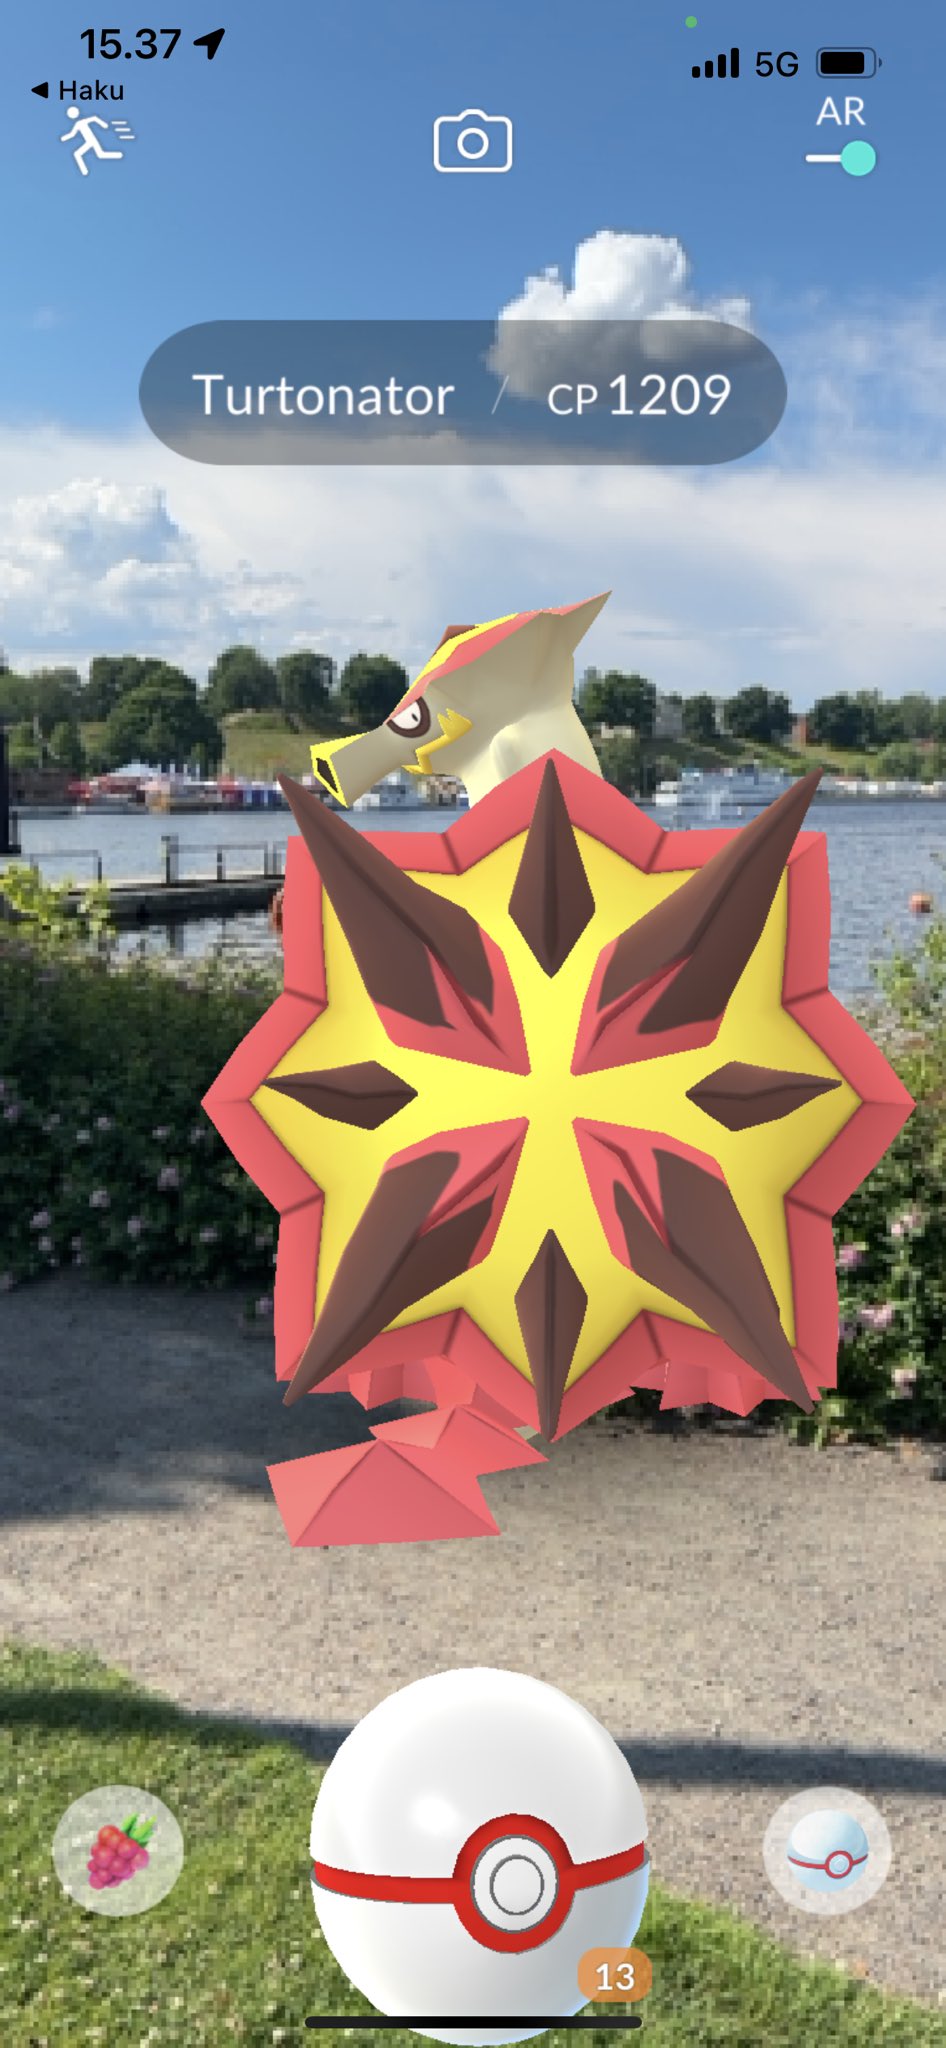 HelsinkiTrolli🇫🇮2M+ Collector on X: First Research: shiny